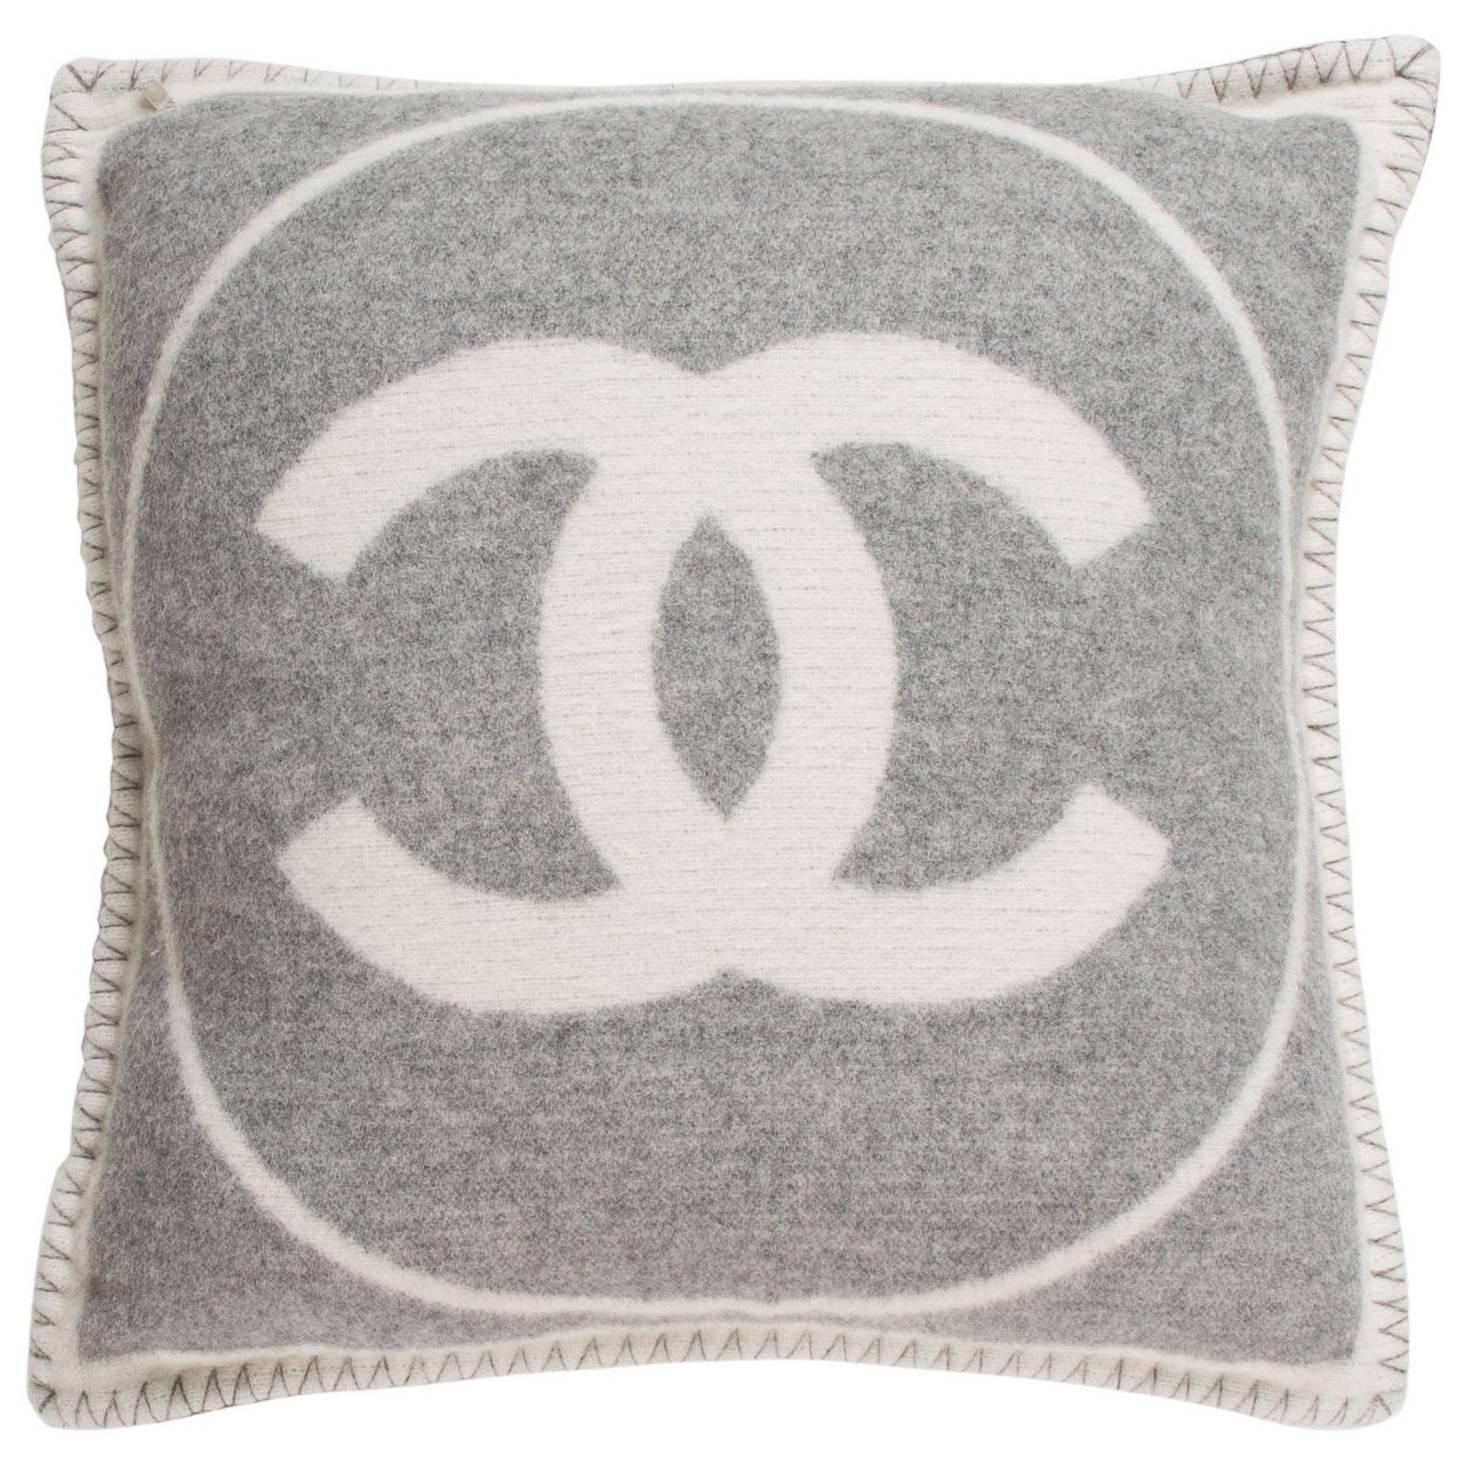 black and silver chanel pillows